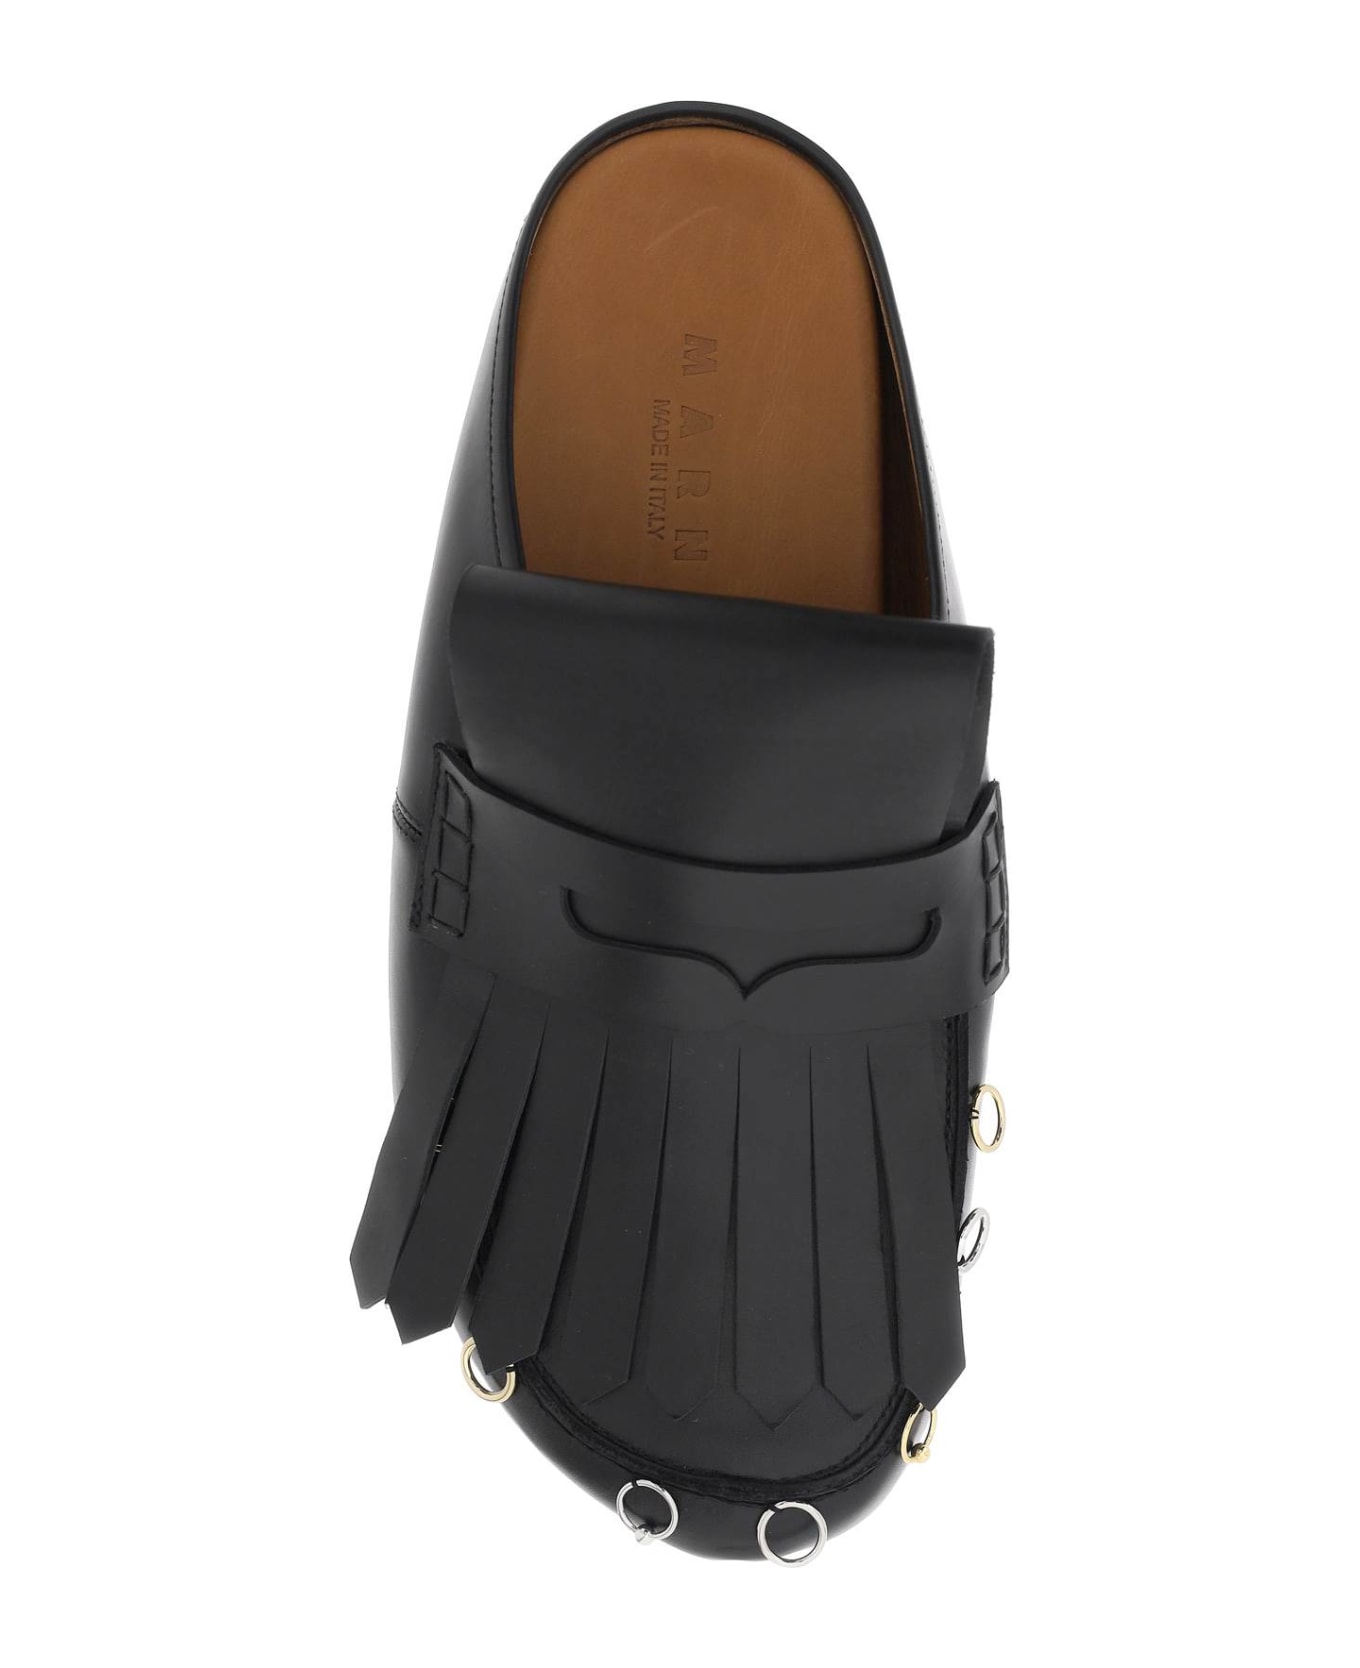 Marni Leather Clogs With Bangs And Piercings - BLACK (Black) その他各種シューズ